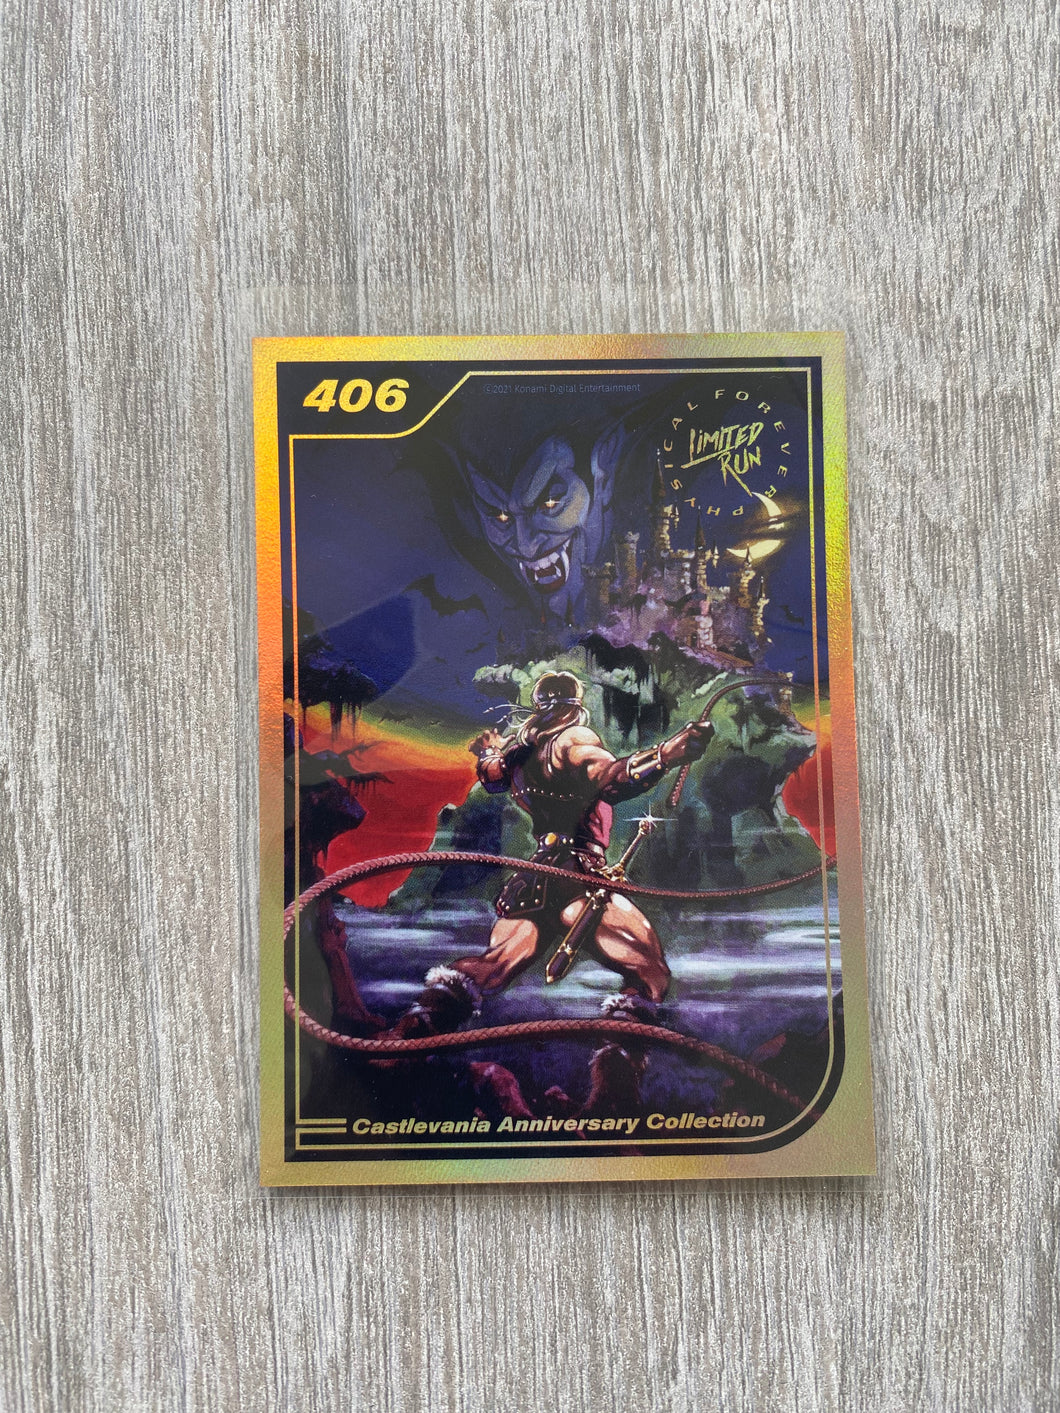 Gen2 #406 Gold Castlevania anniversary collection Limited run games Trading card